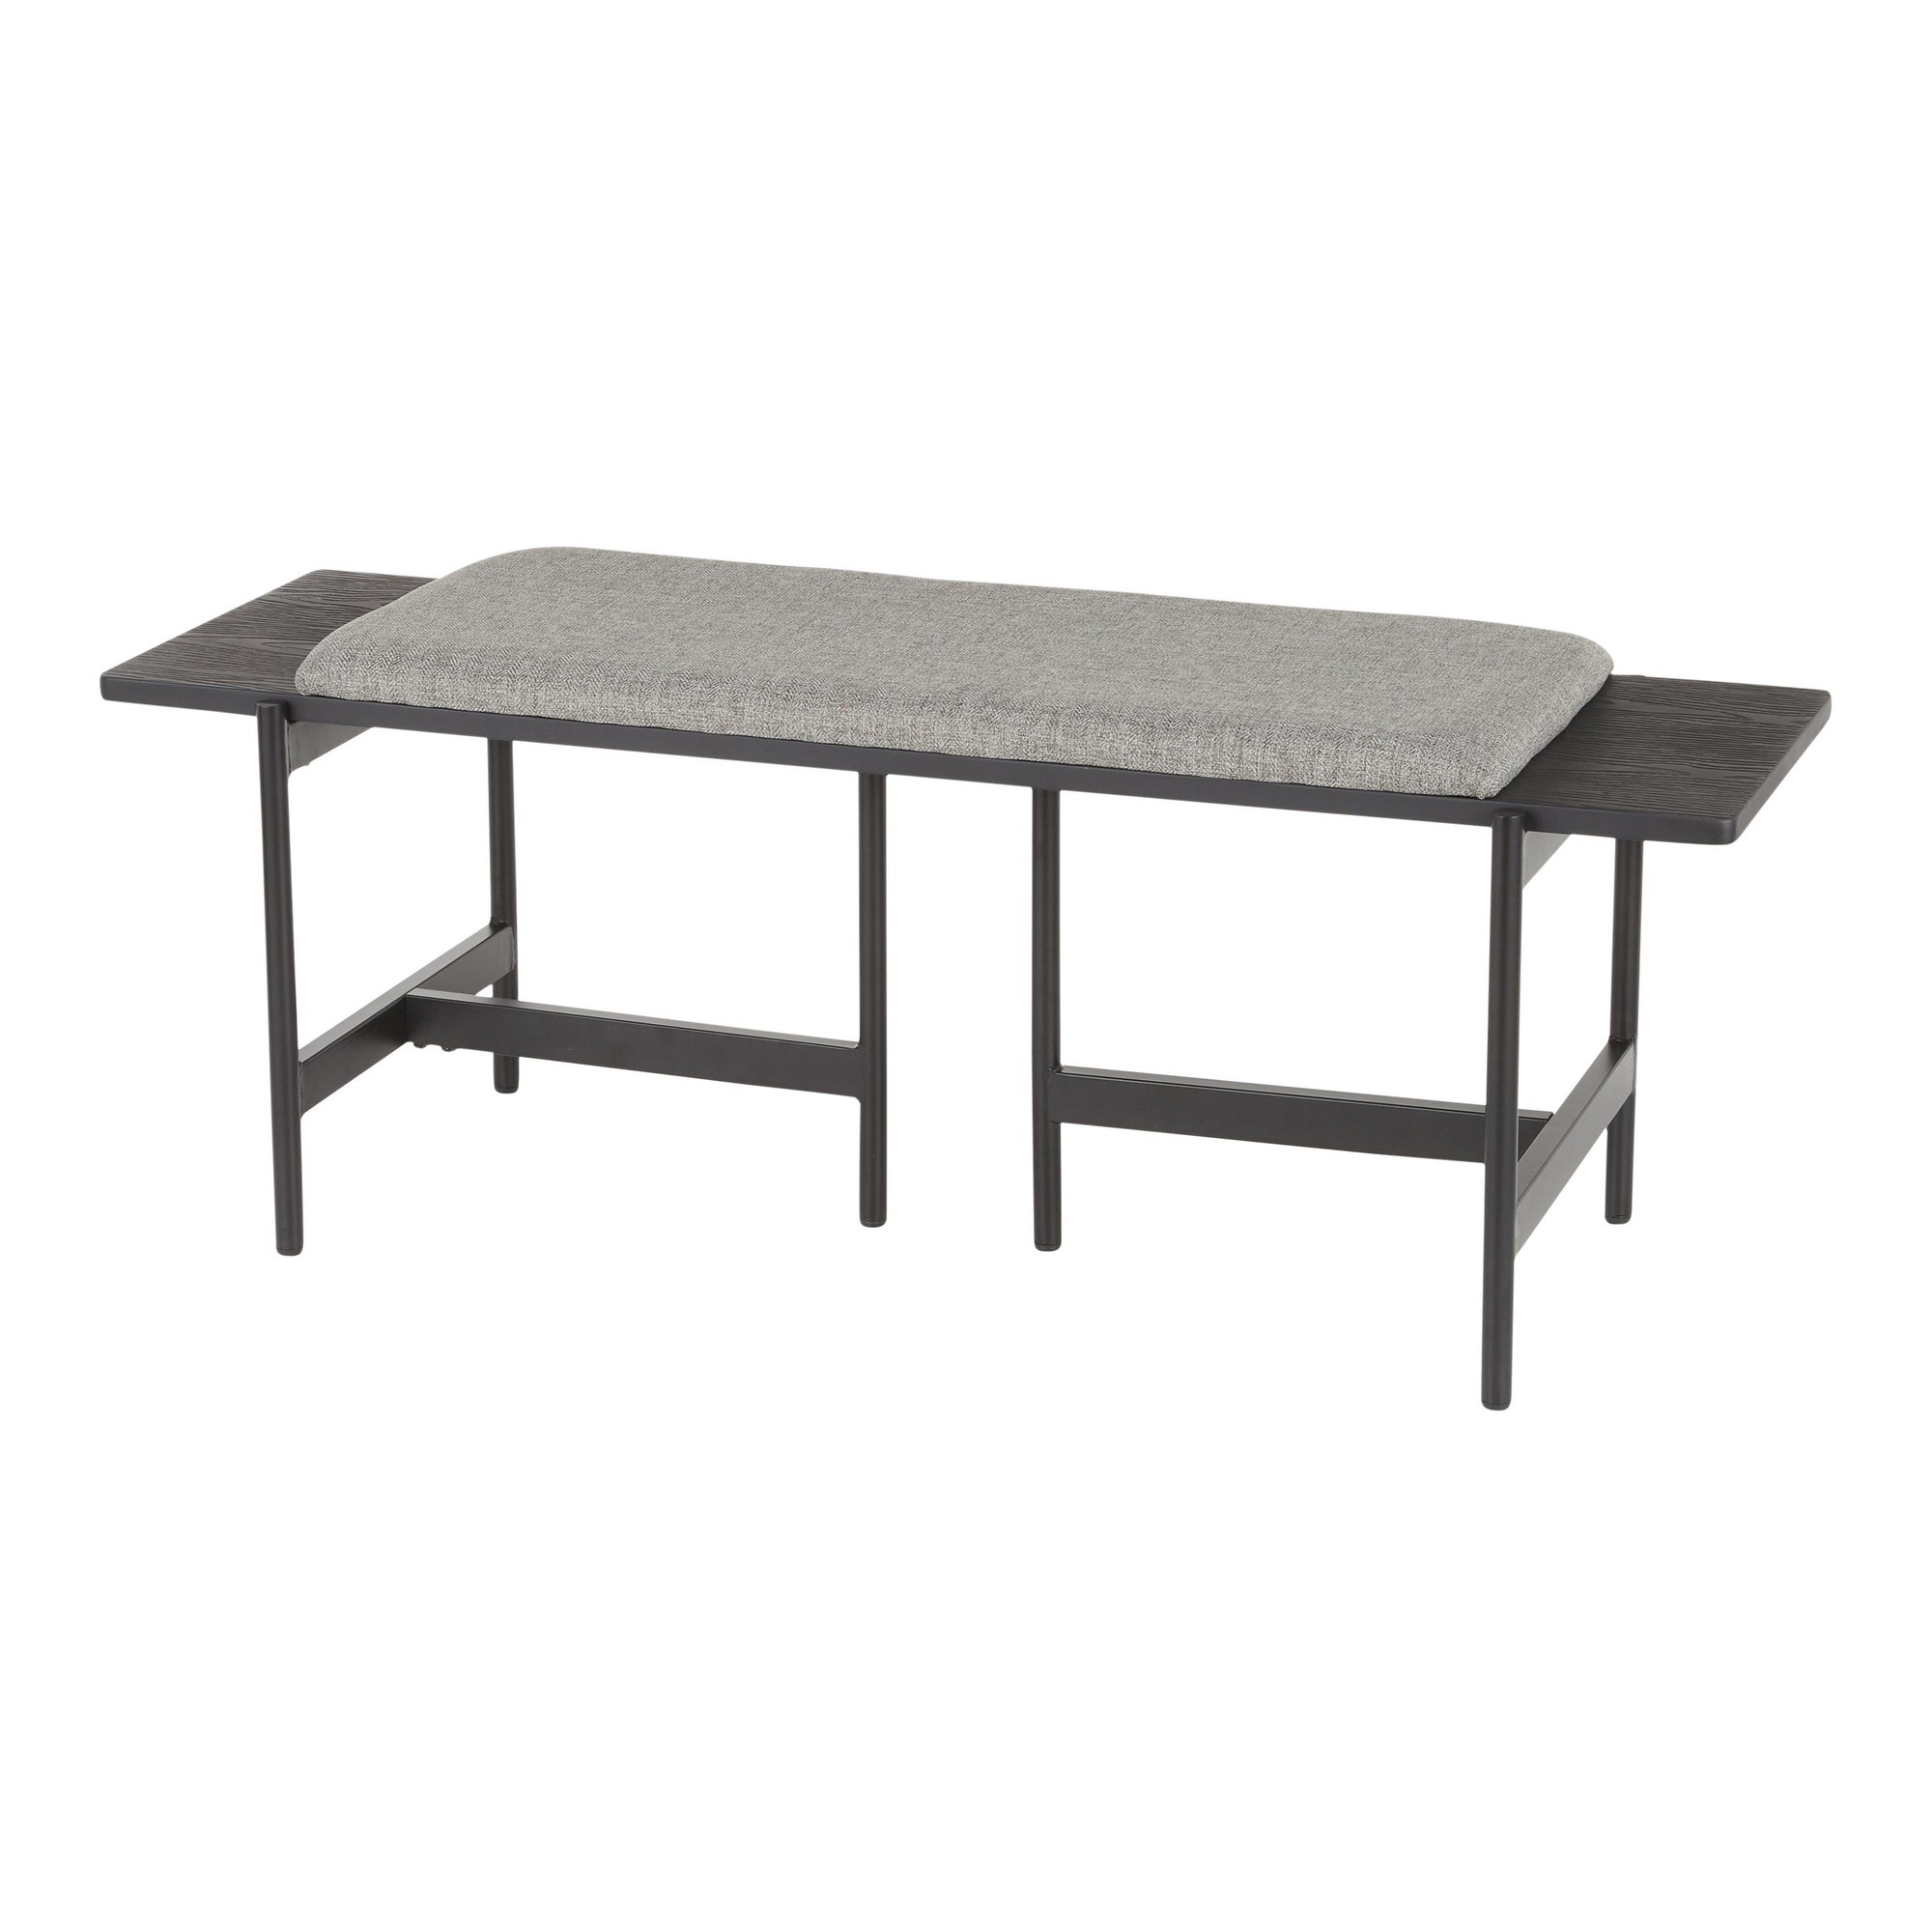 Chloe Contemporary Bench in Black Metal and Grey Fabric with Black Wood Accents by LumiSource - image 3 of 6